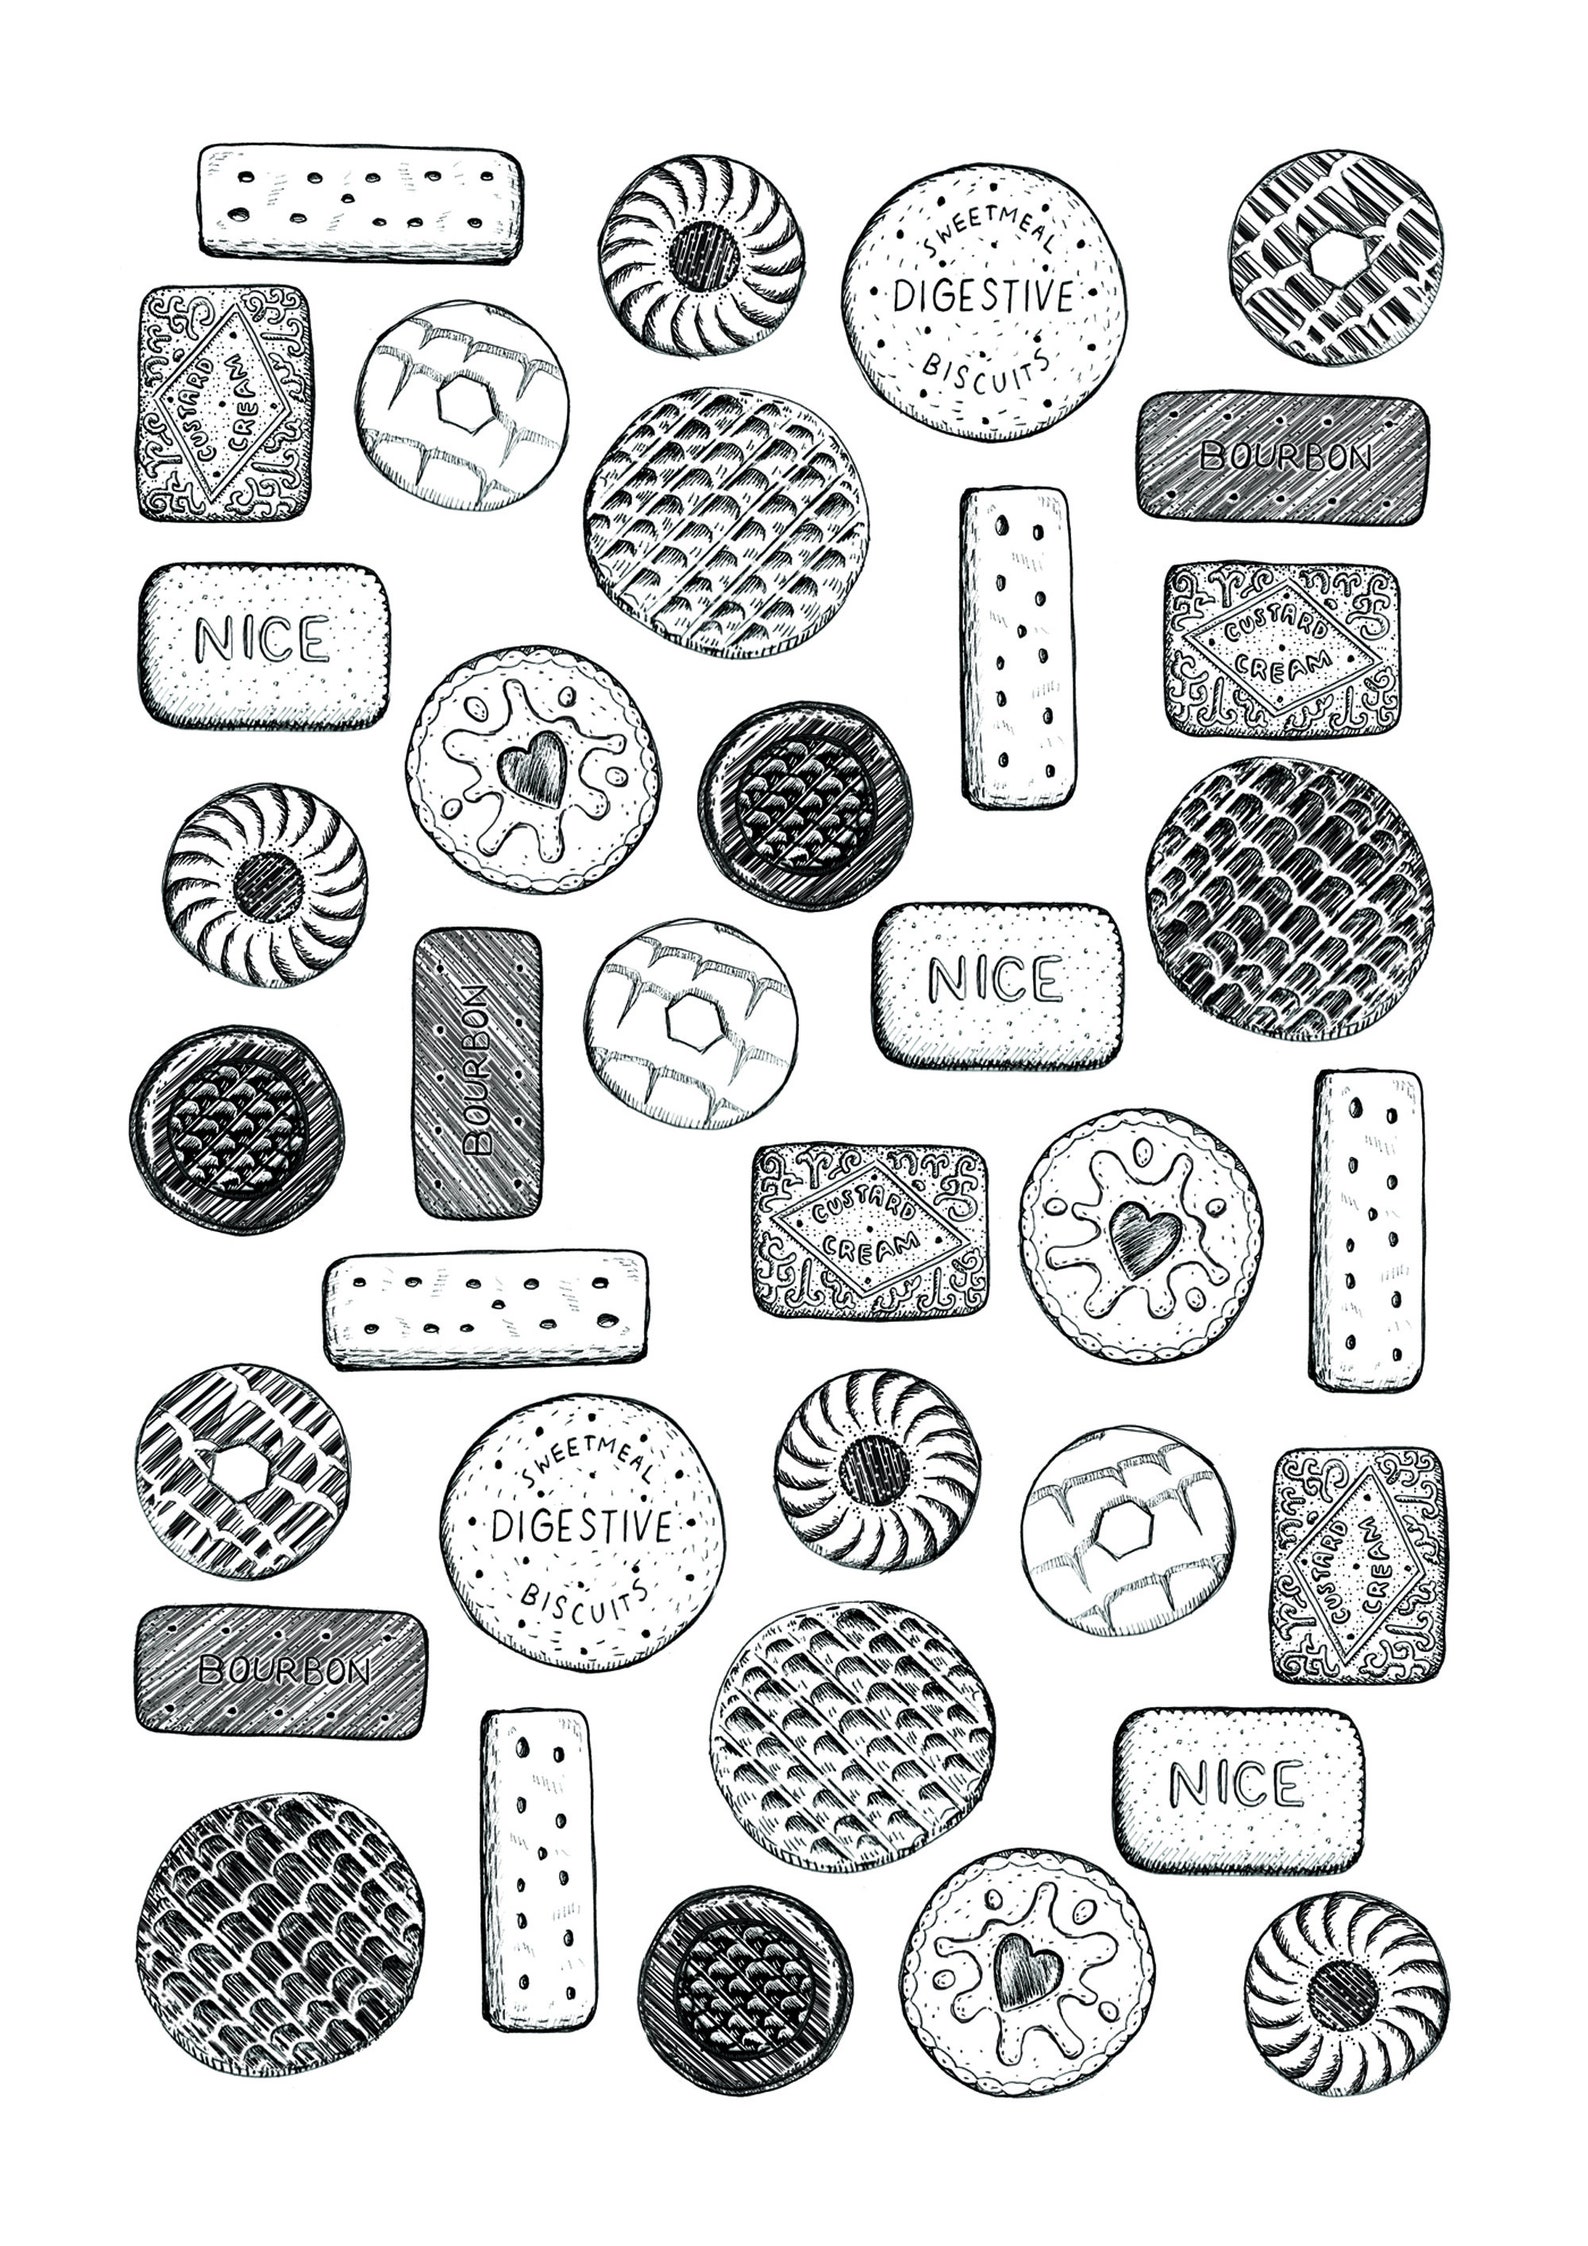 Hand Sketched Illustration Of Biscuits A3 Black And White Digital Matt